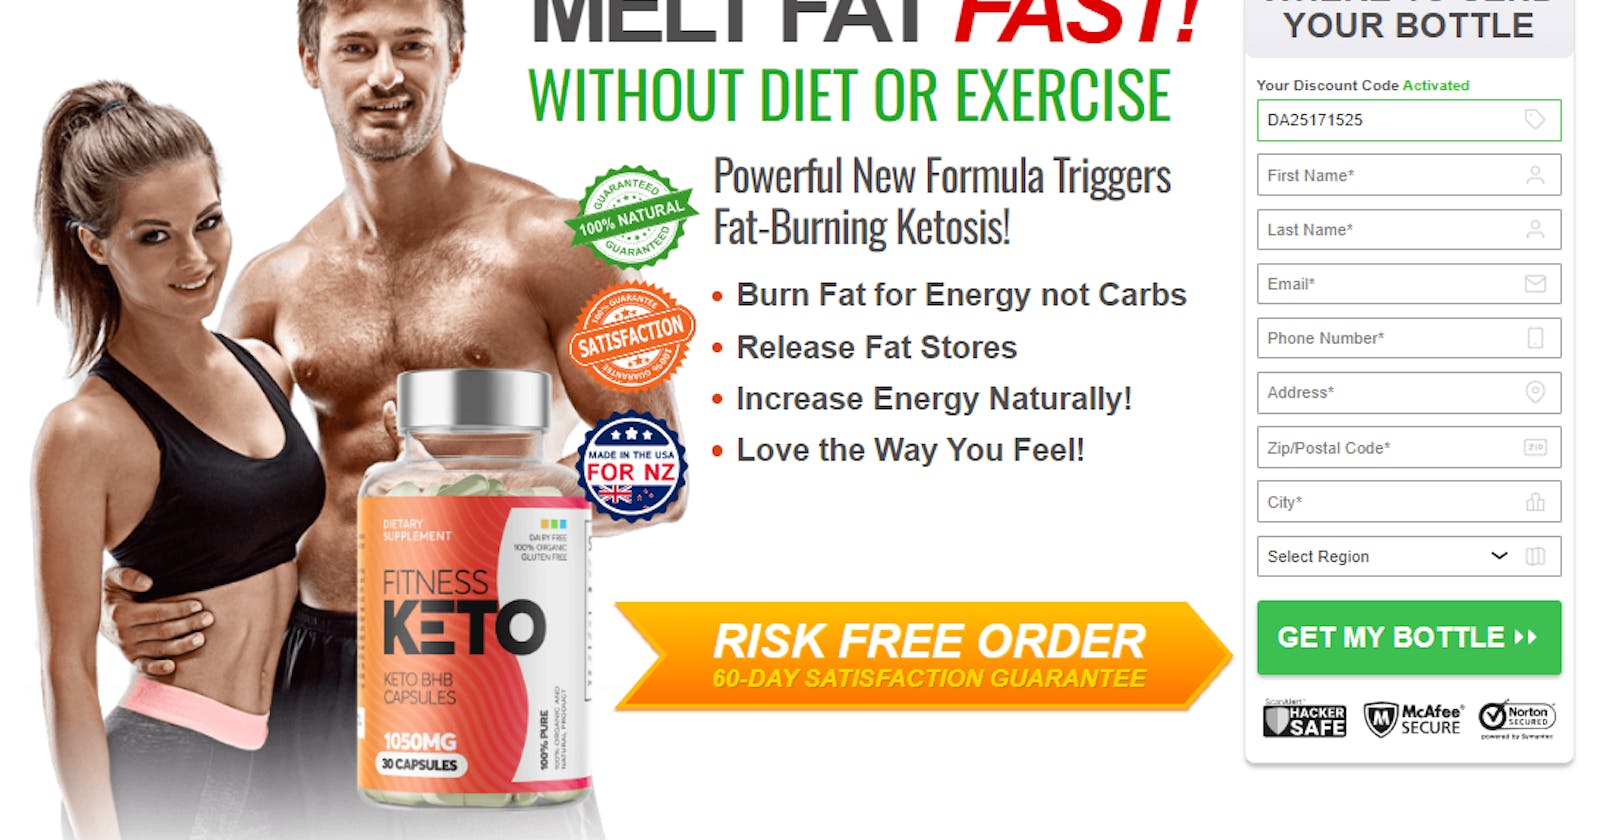 Fitness Keto Capsules New Zealand: Is It Safe Or Effective?